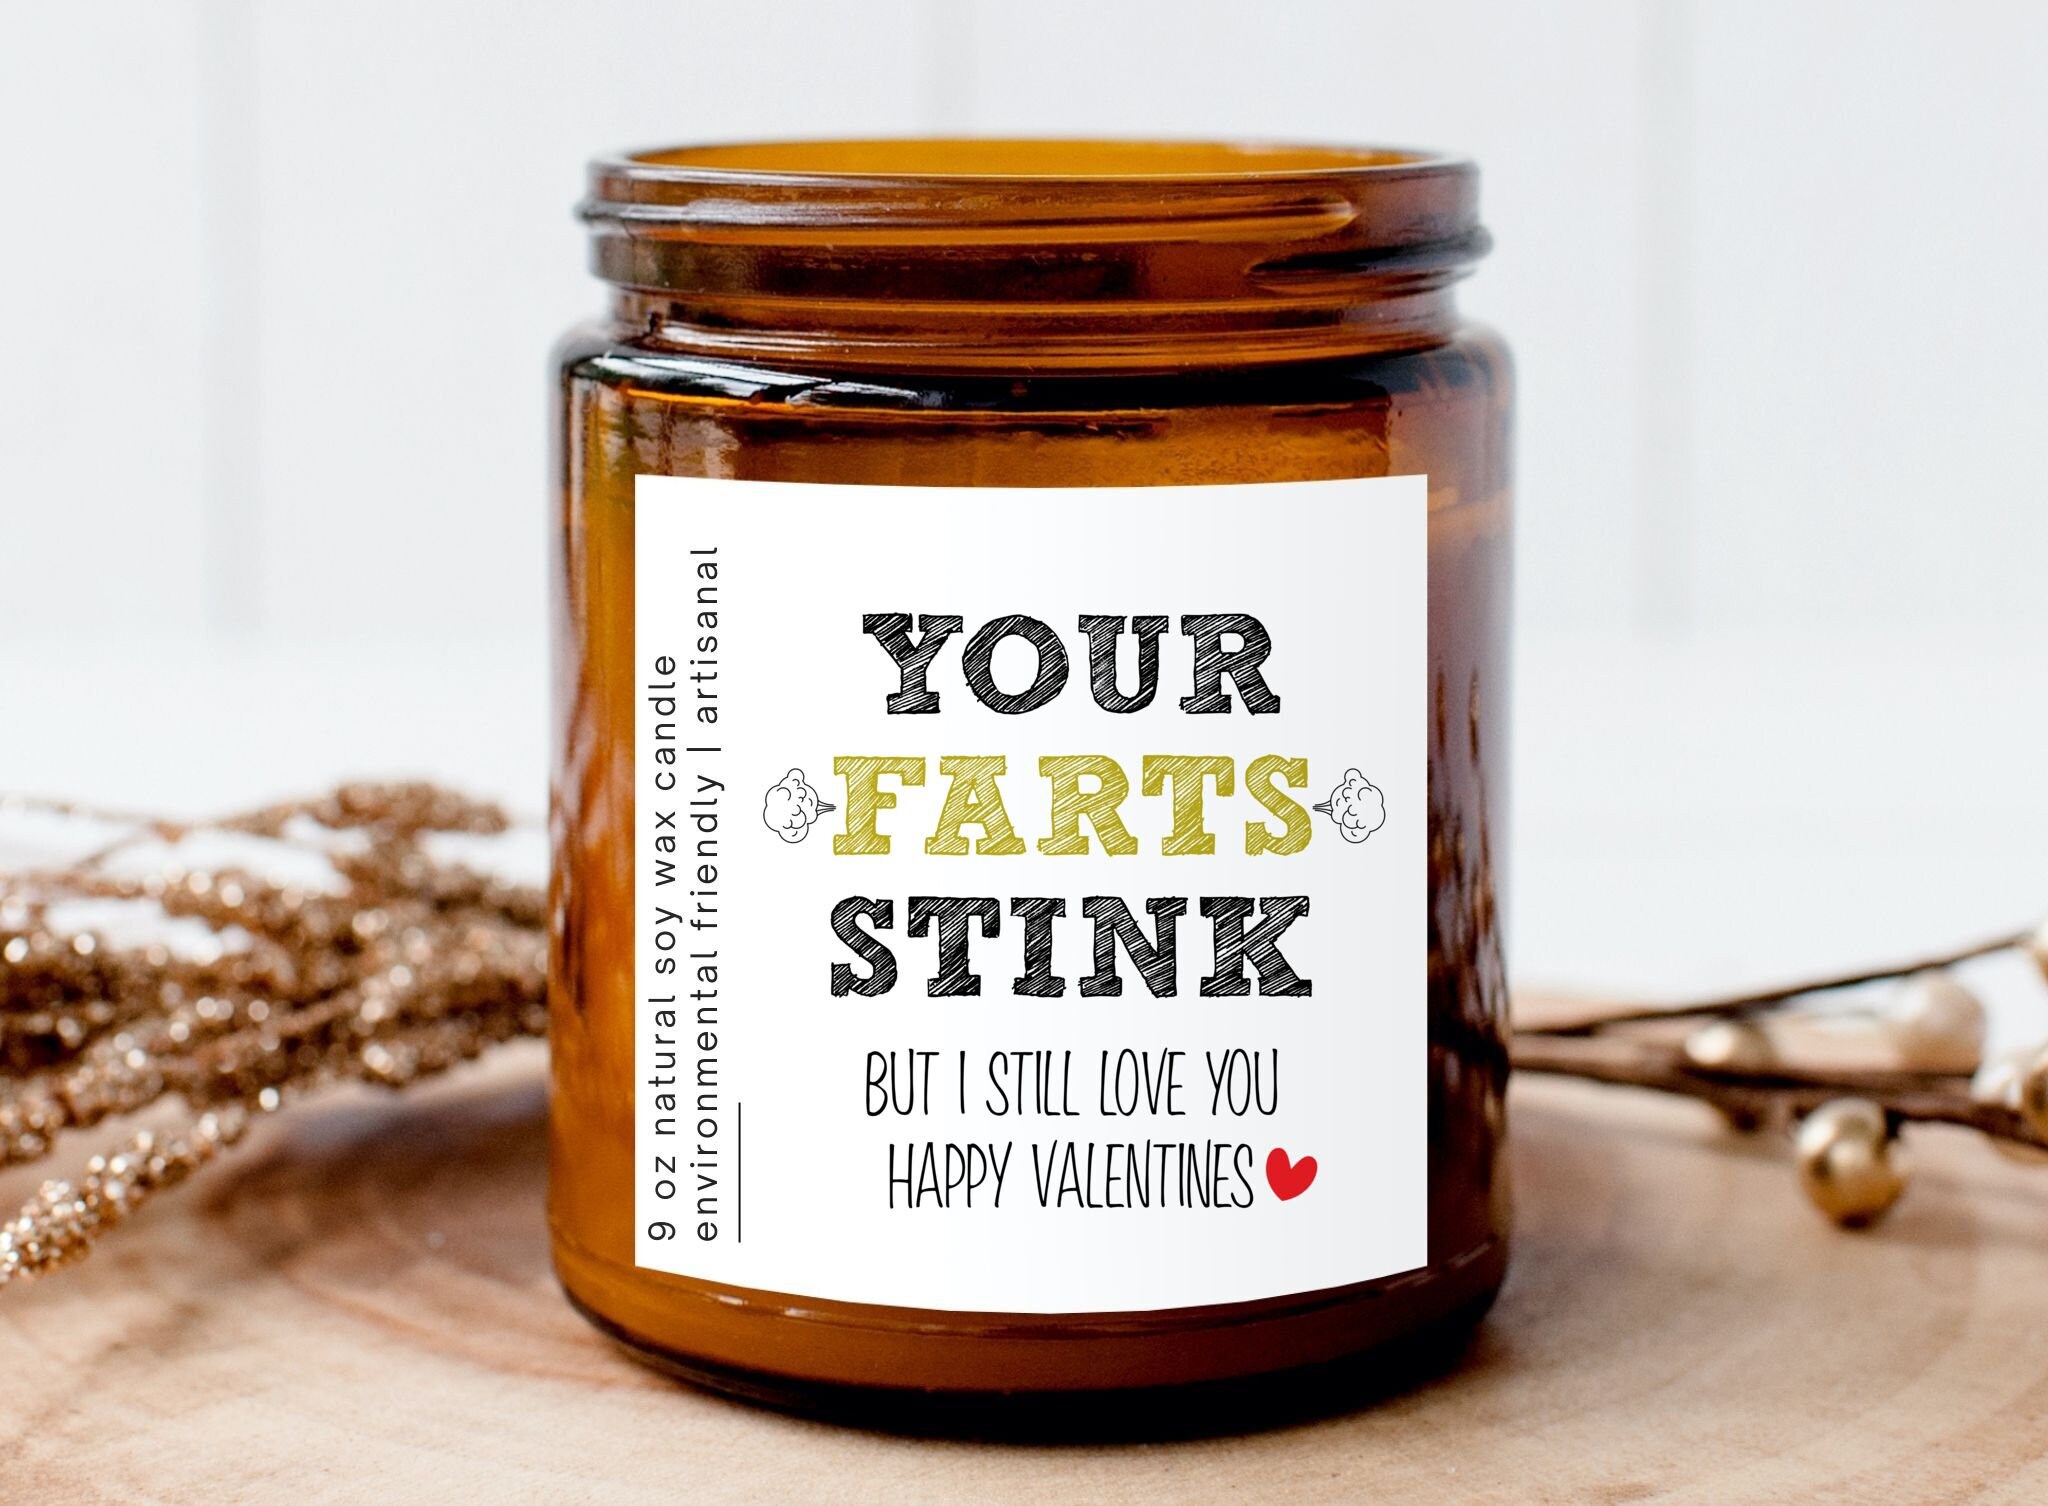  Fart in a Jar - 100% Real Human Farts in a Jar - Funny Pranks  Gag Gifts : Handmade Products